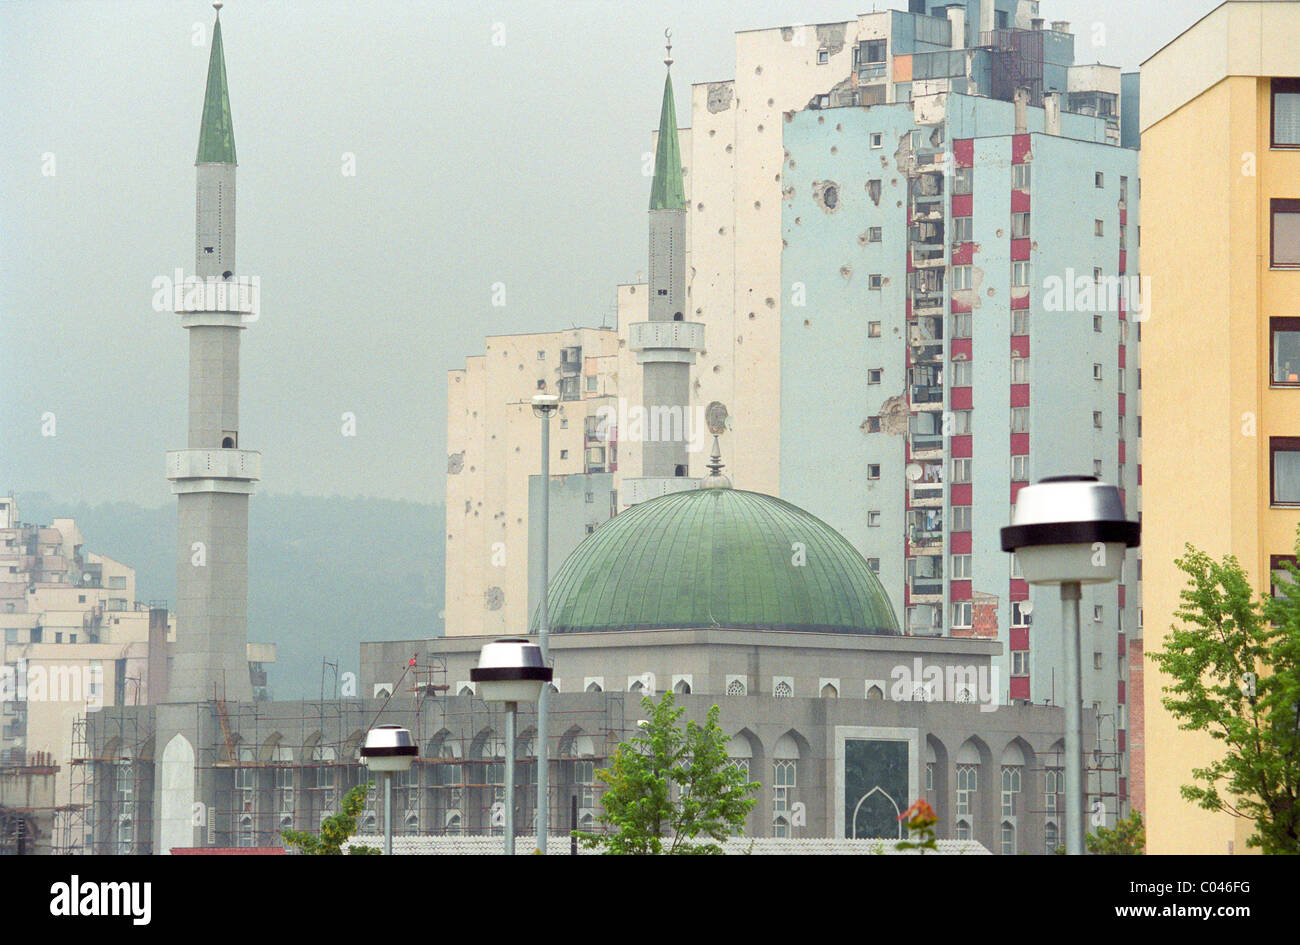 A newly built mosque sponsored by Saudi Arabia in front of war damaged apartment blocks in Sarejevo Stock Photo